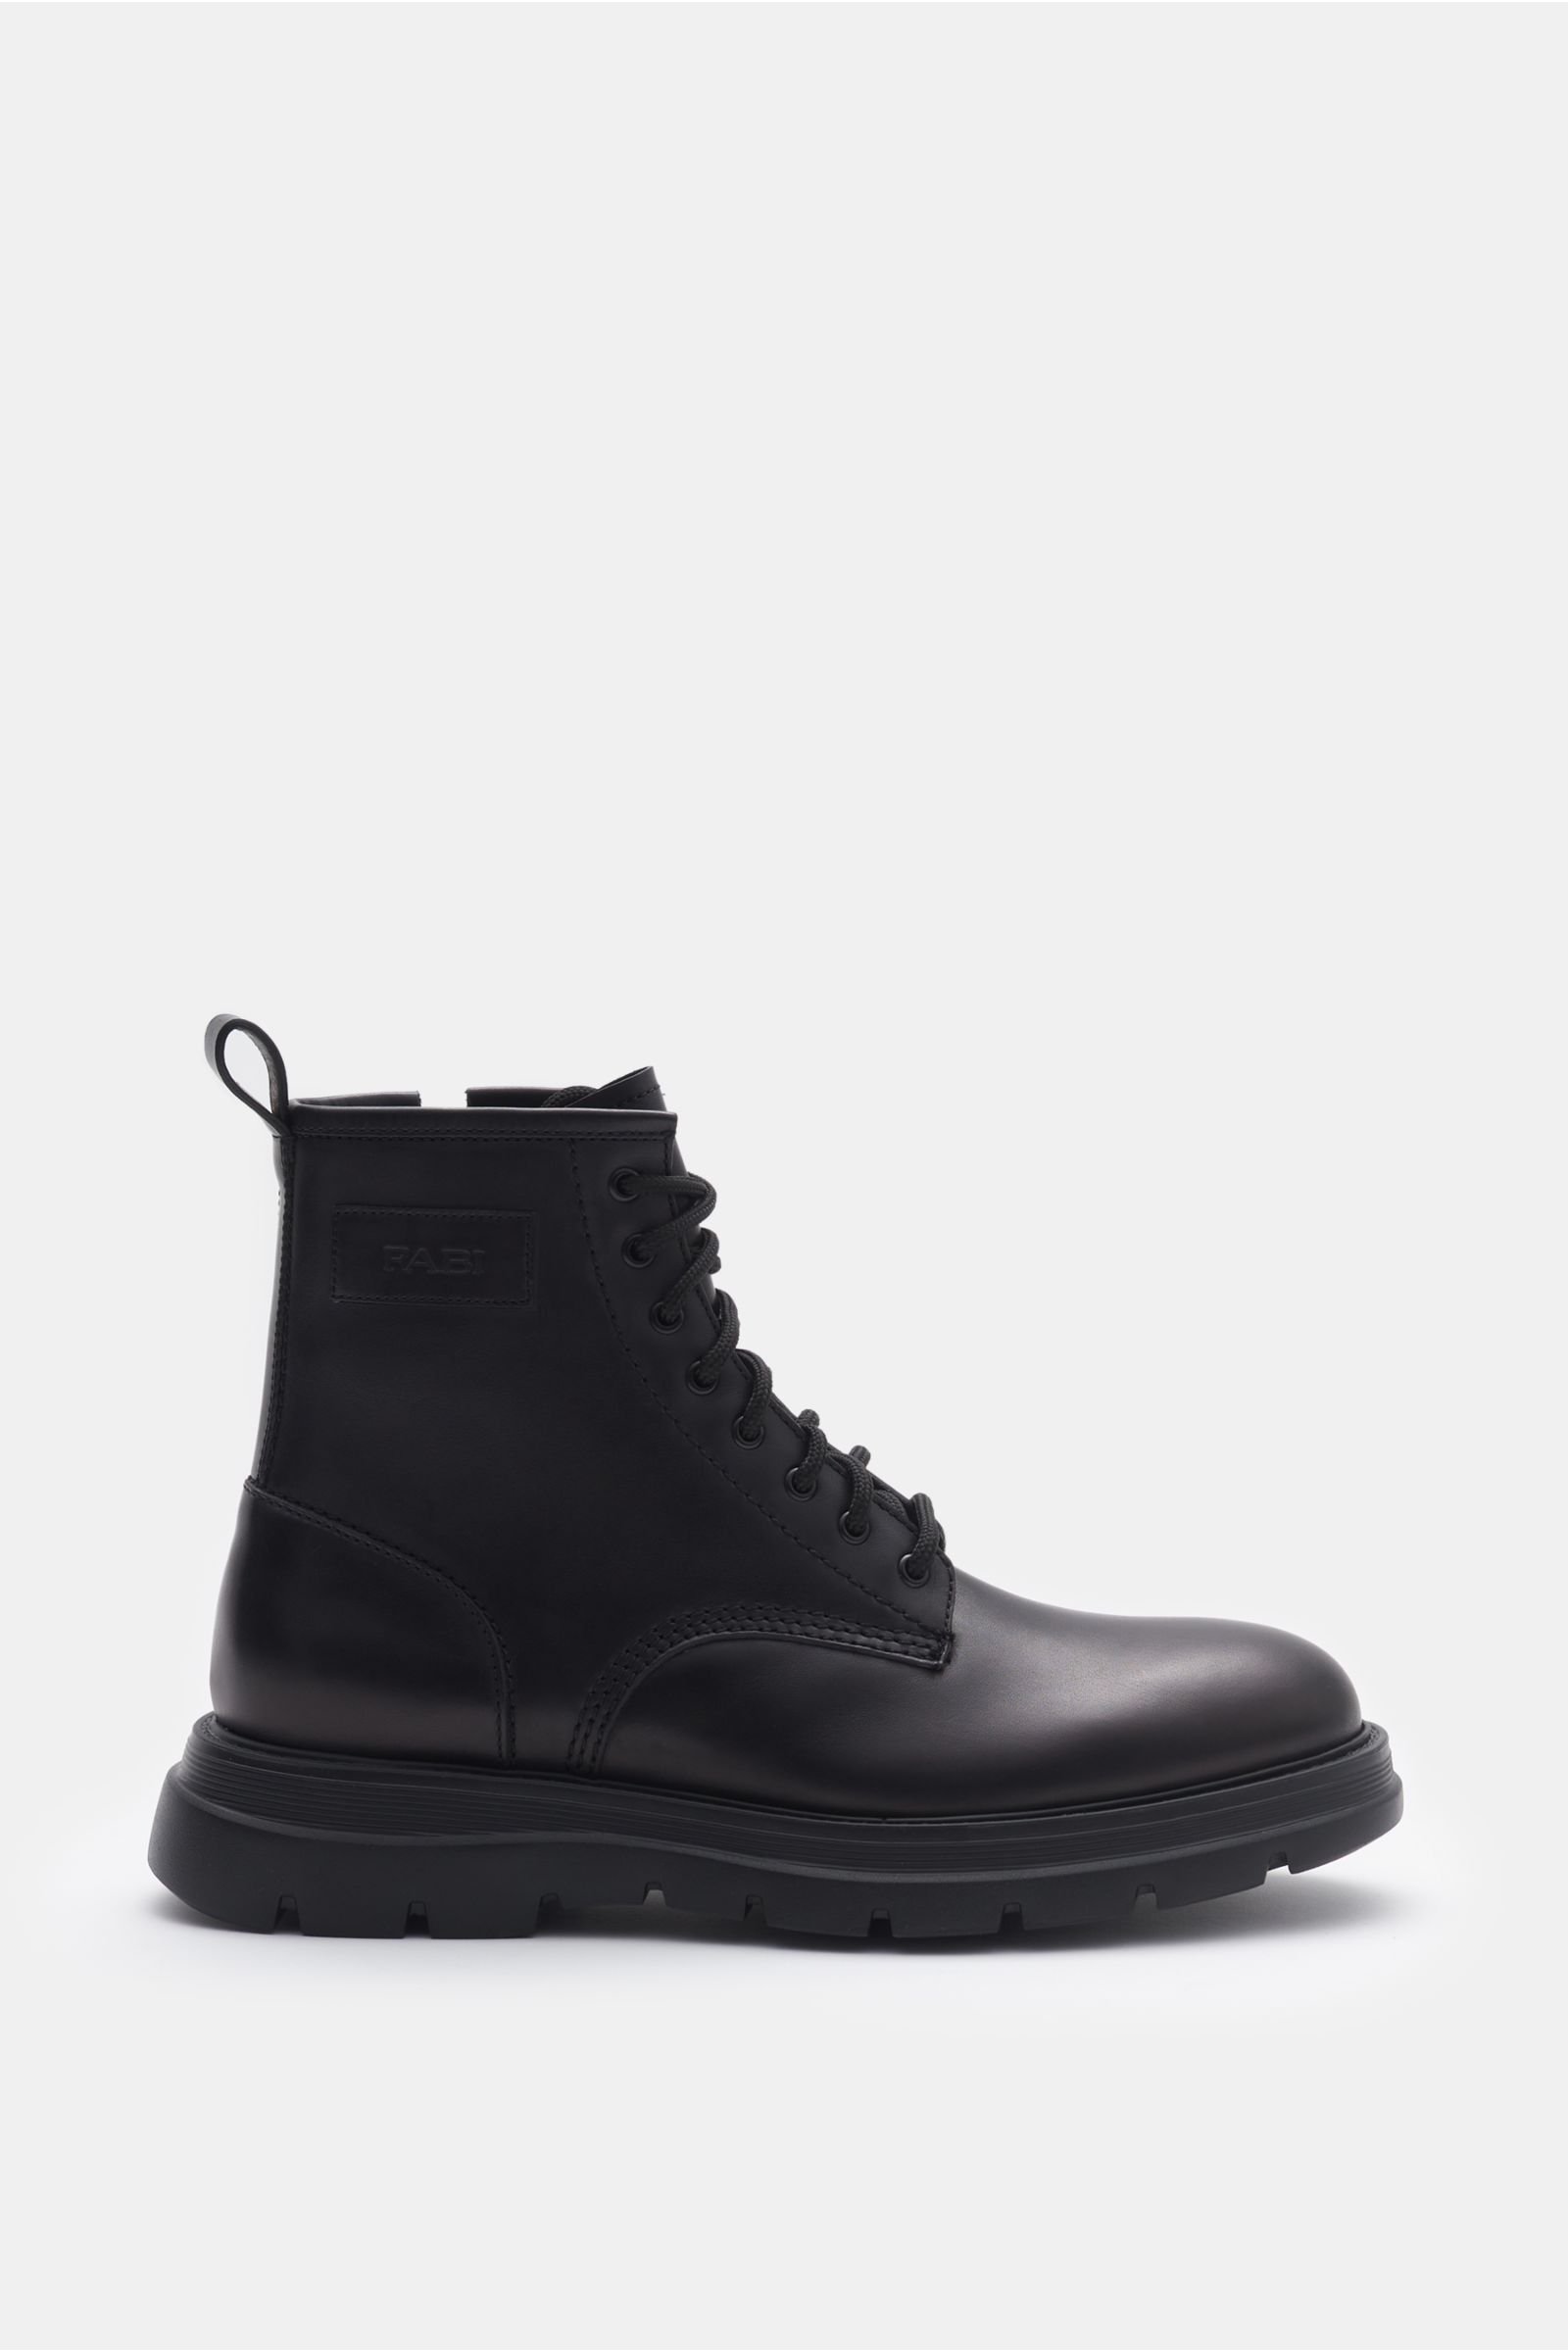 Lace-up boots black